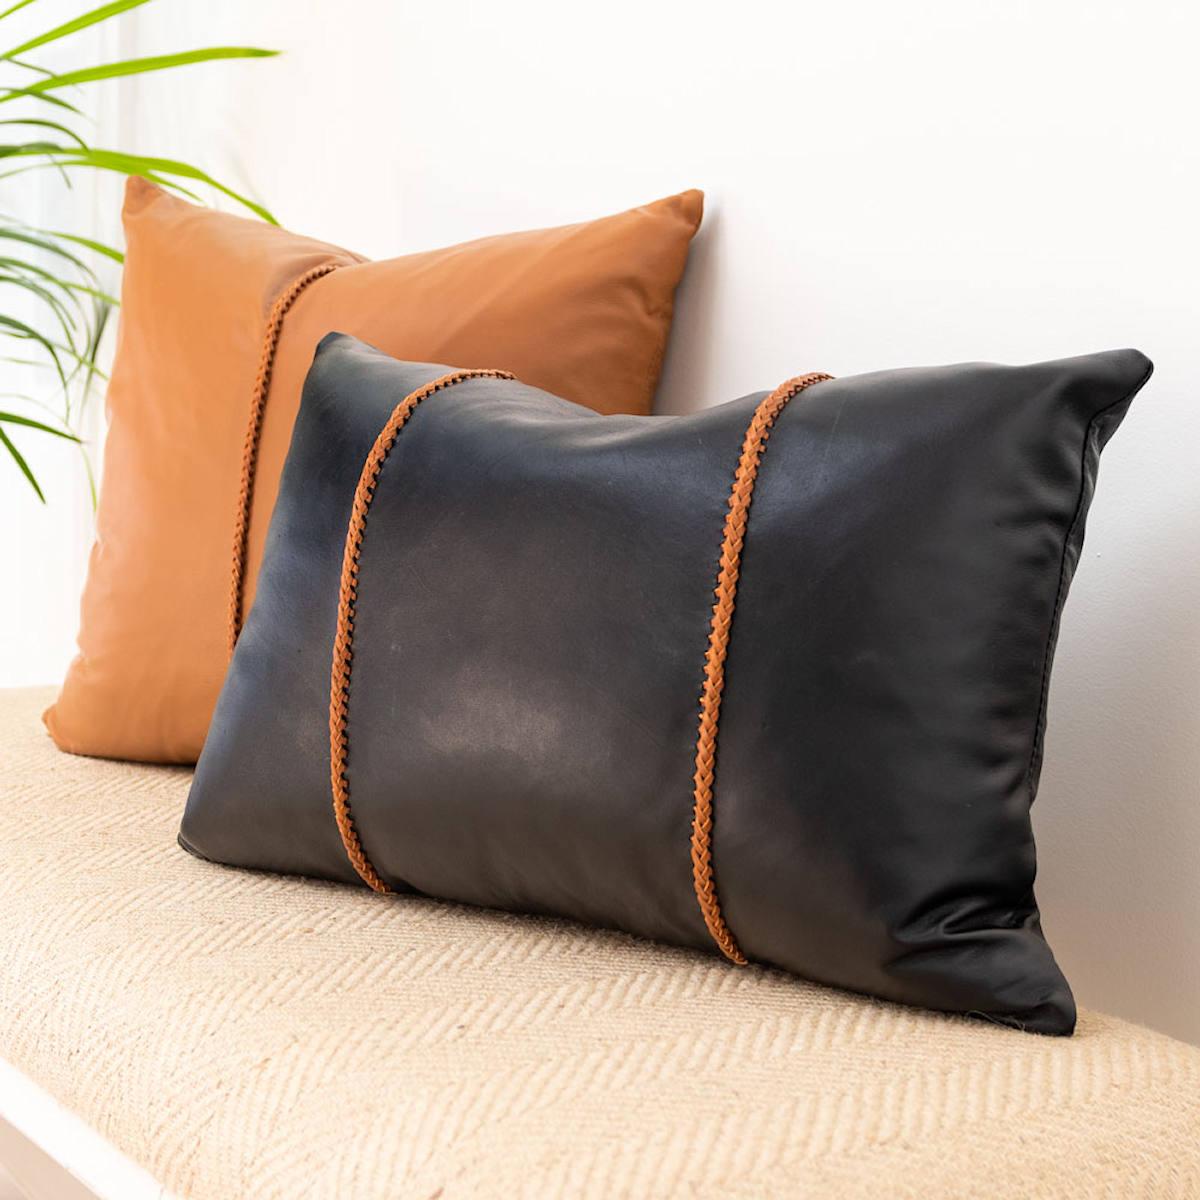 Industrial Black Leather Pillow with Tan Leather Cross Stitch, Lumbar Cushion